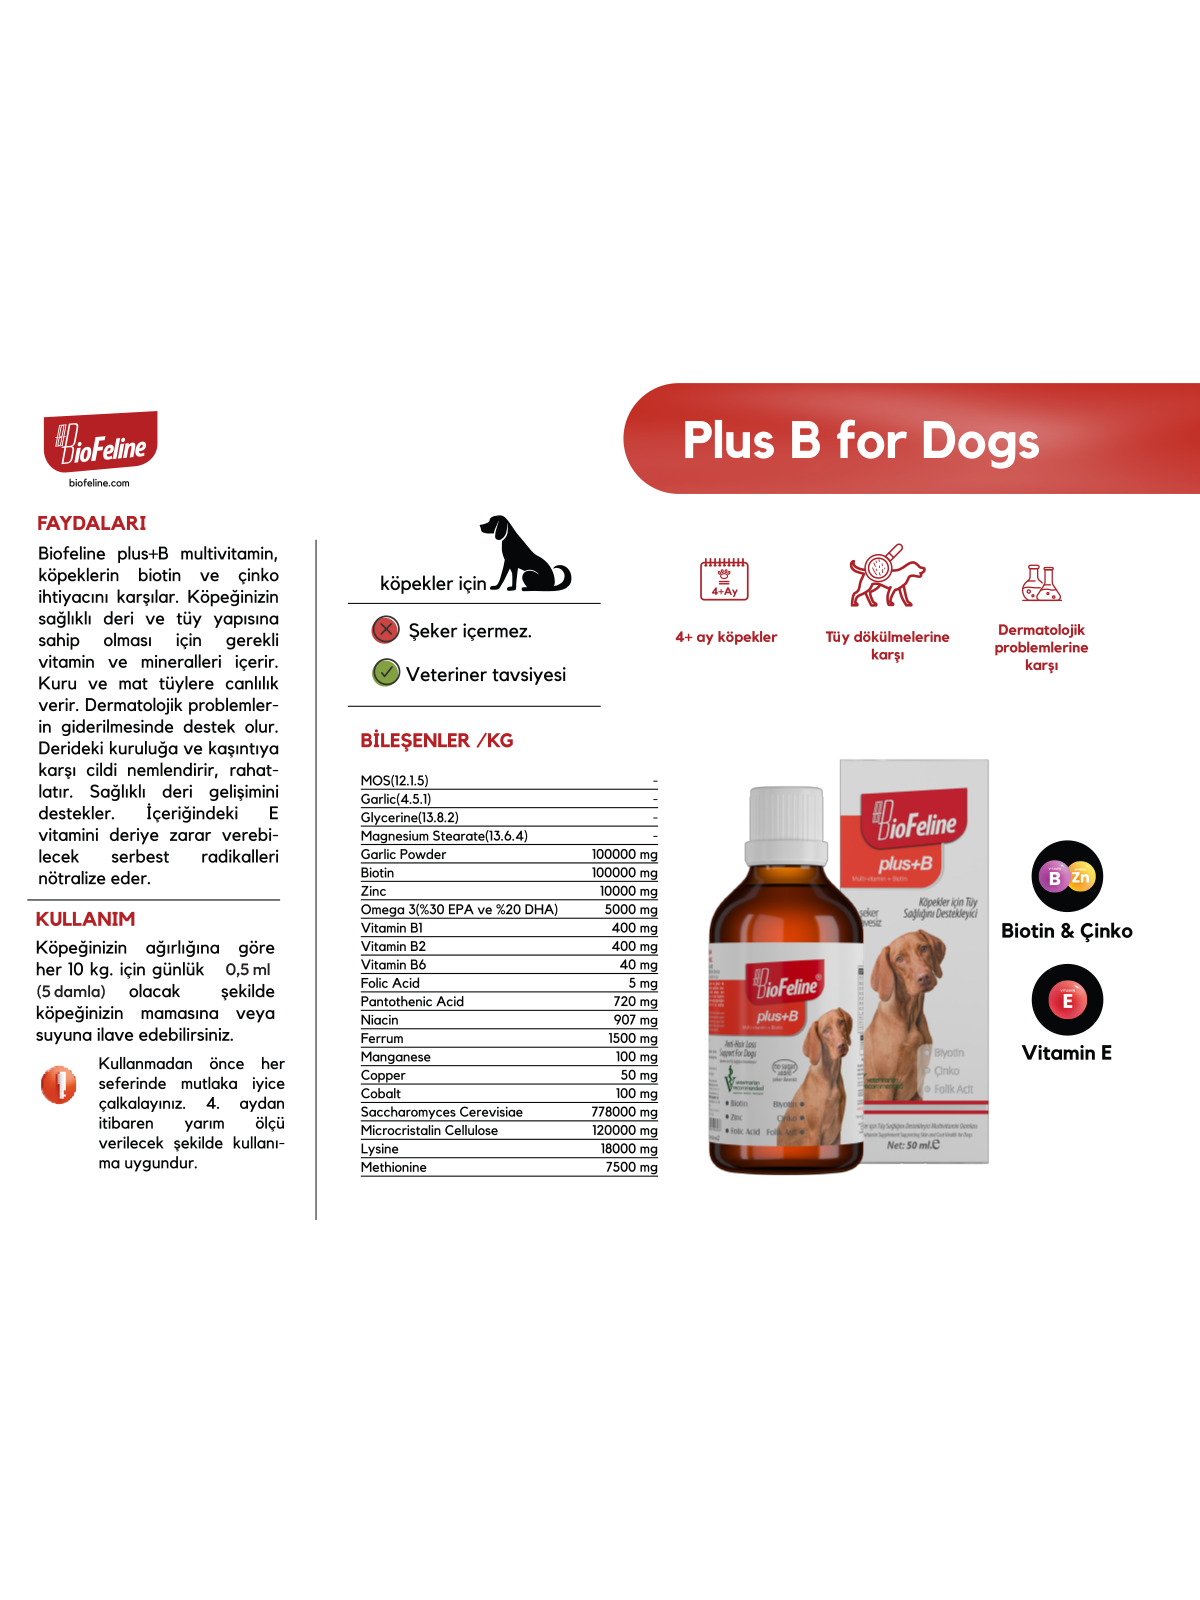 Fish Oil 200ml & Plus+B For Dogs 50ml